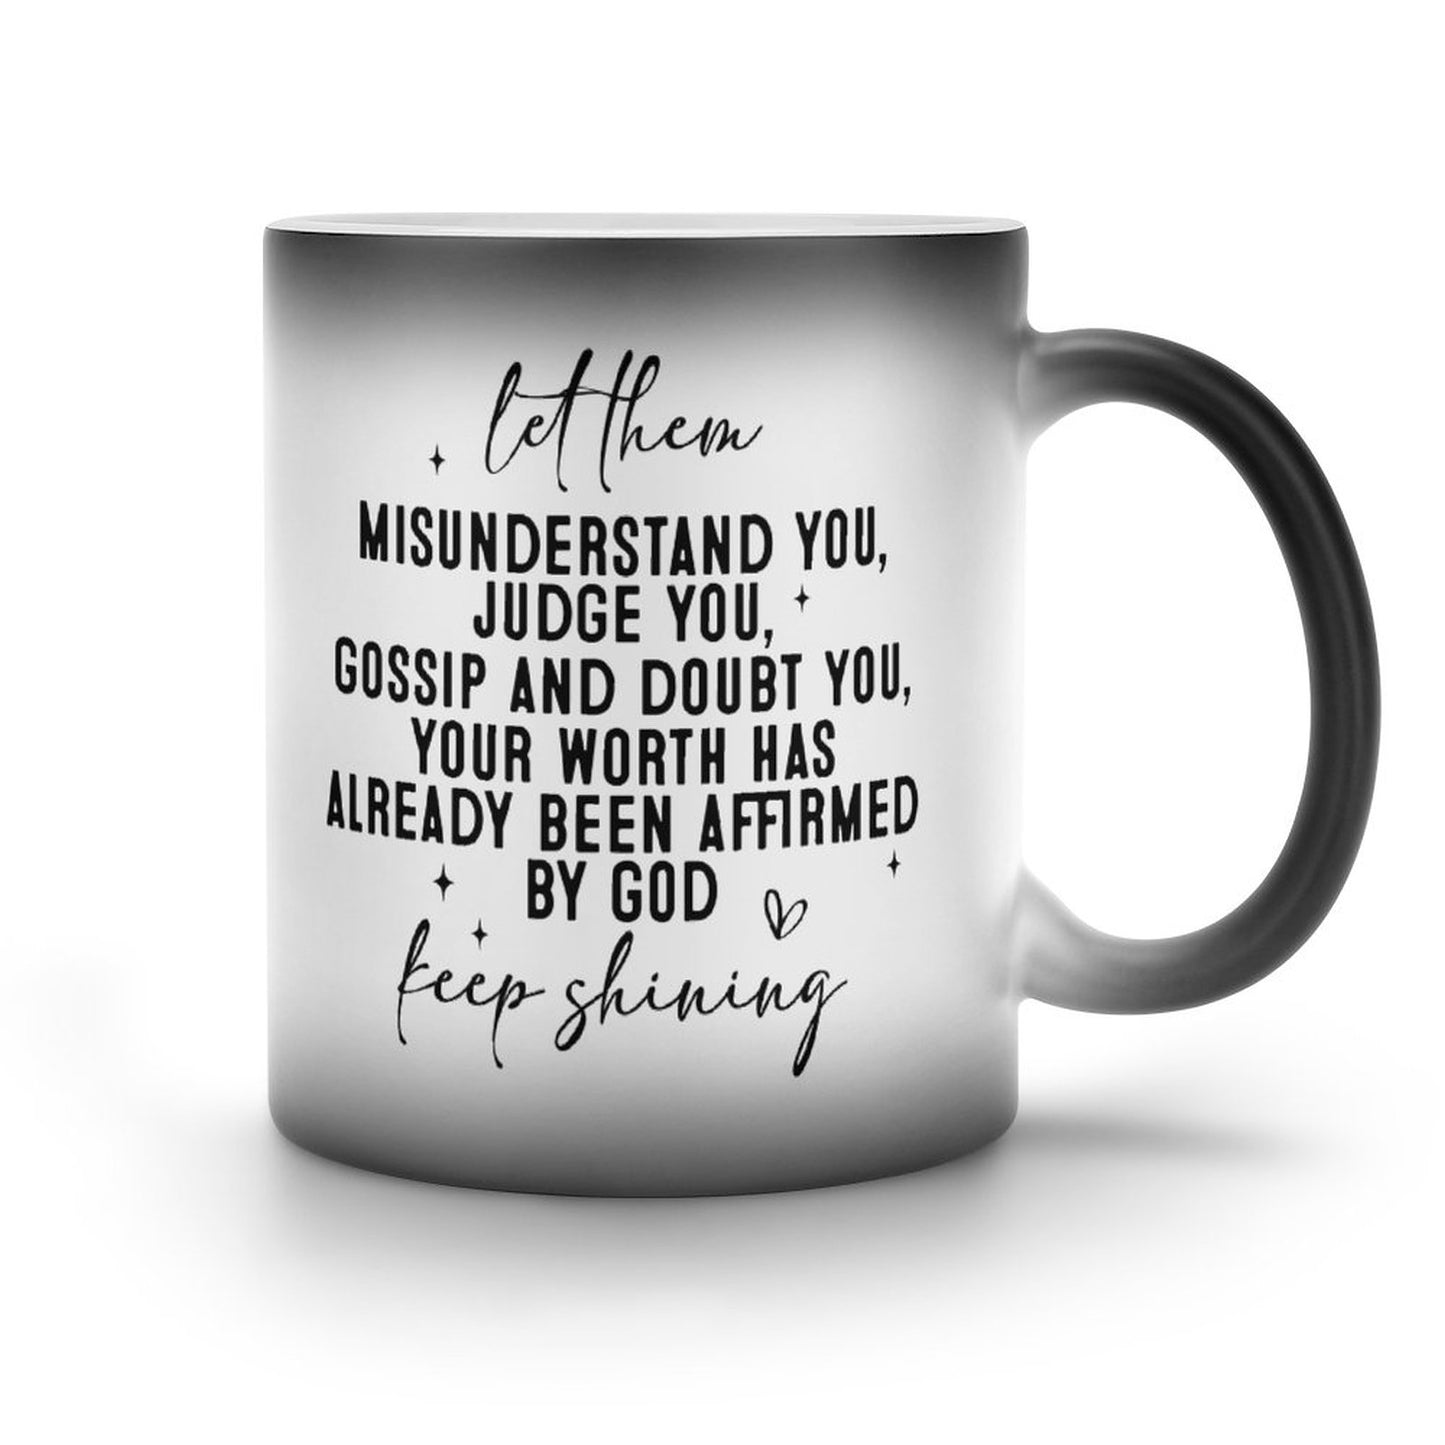 Keep Shining Your Worth Has Already Been Affirmed By God Christian Color Changing Mug (Dual-sided)